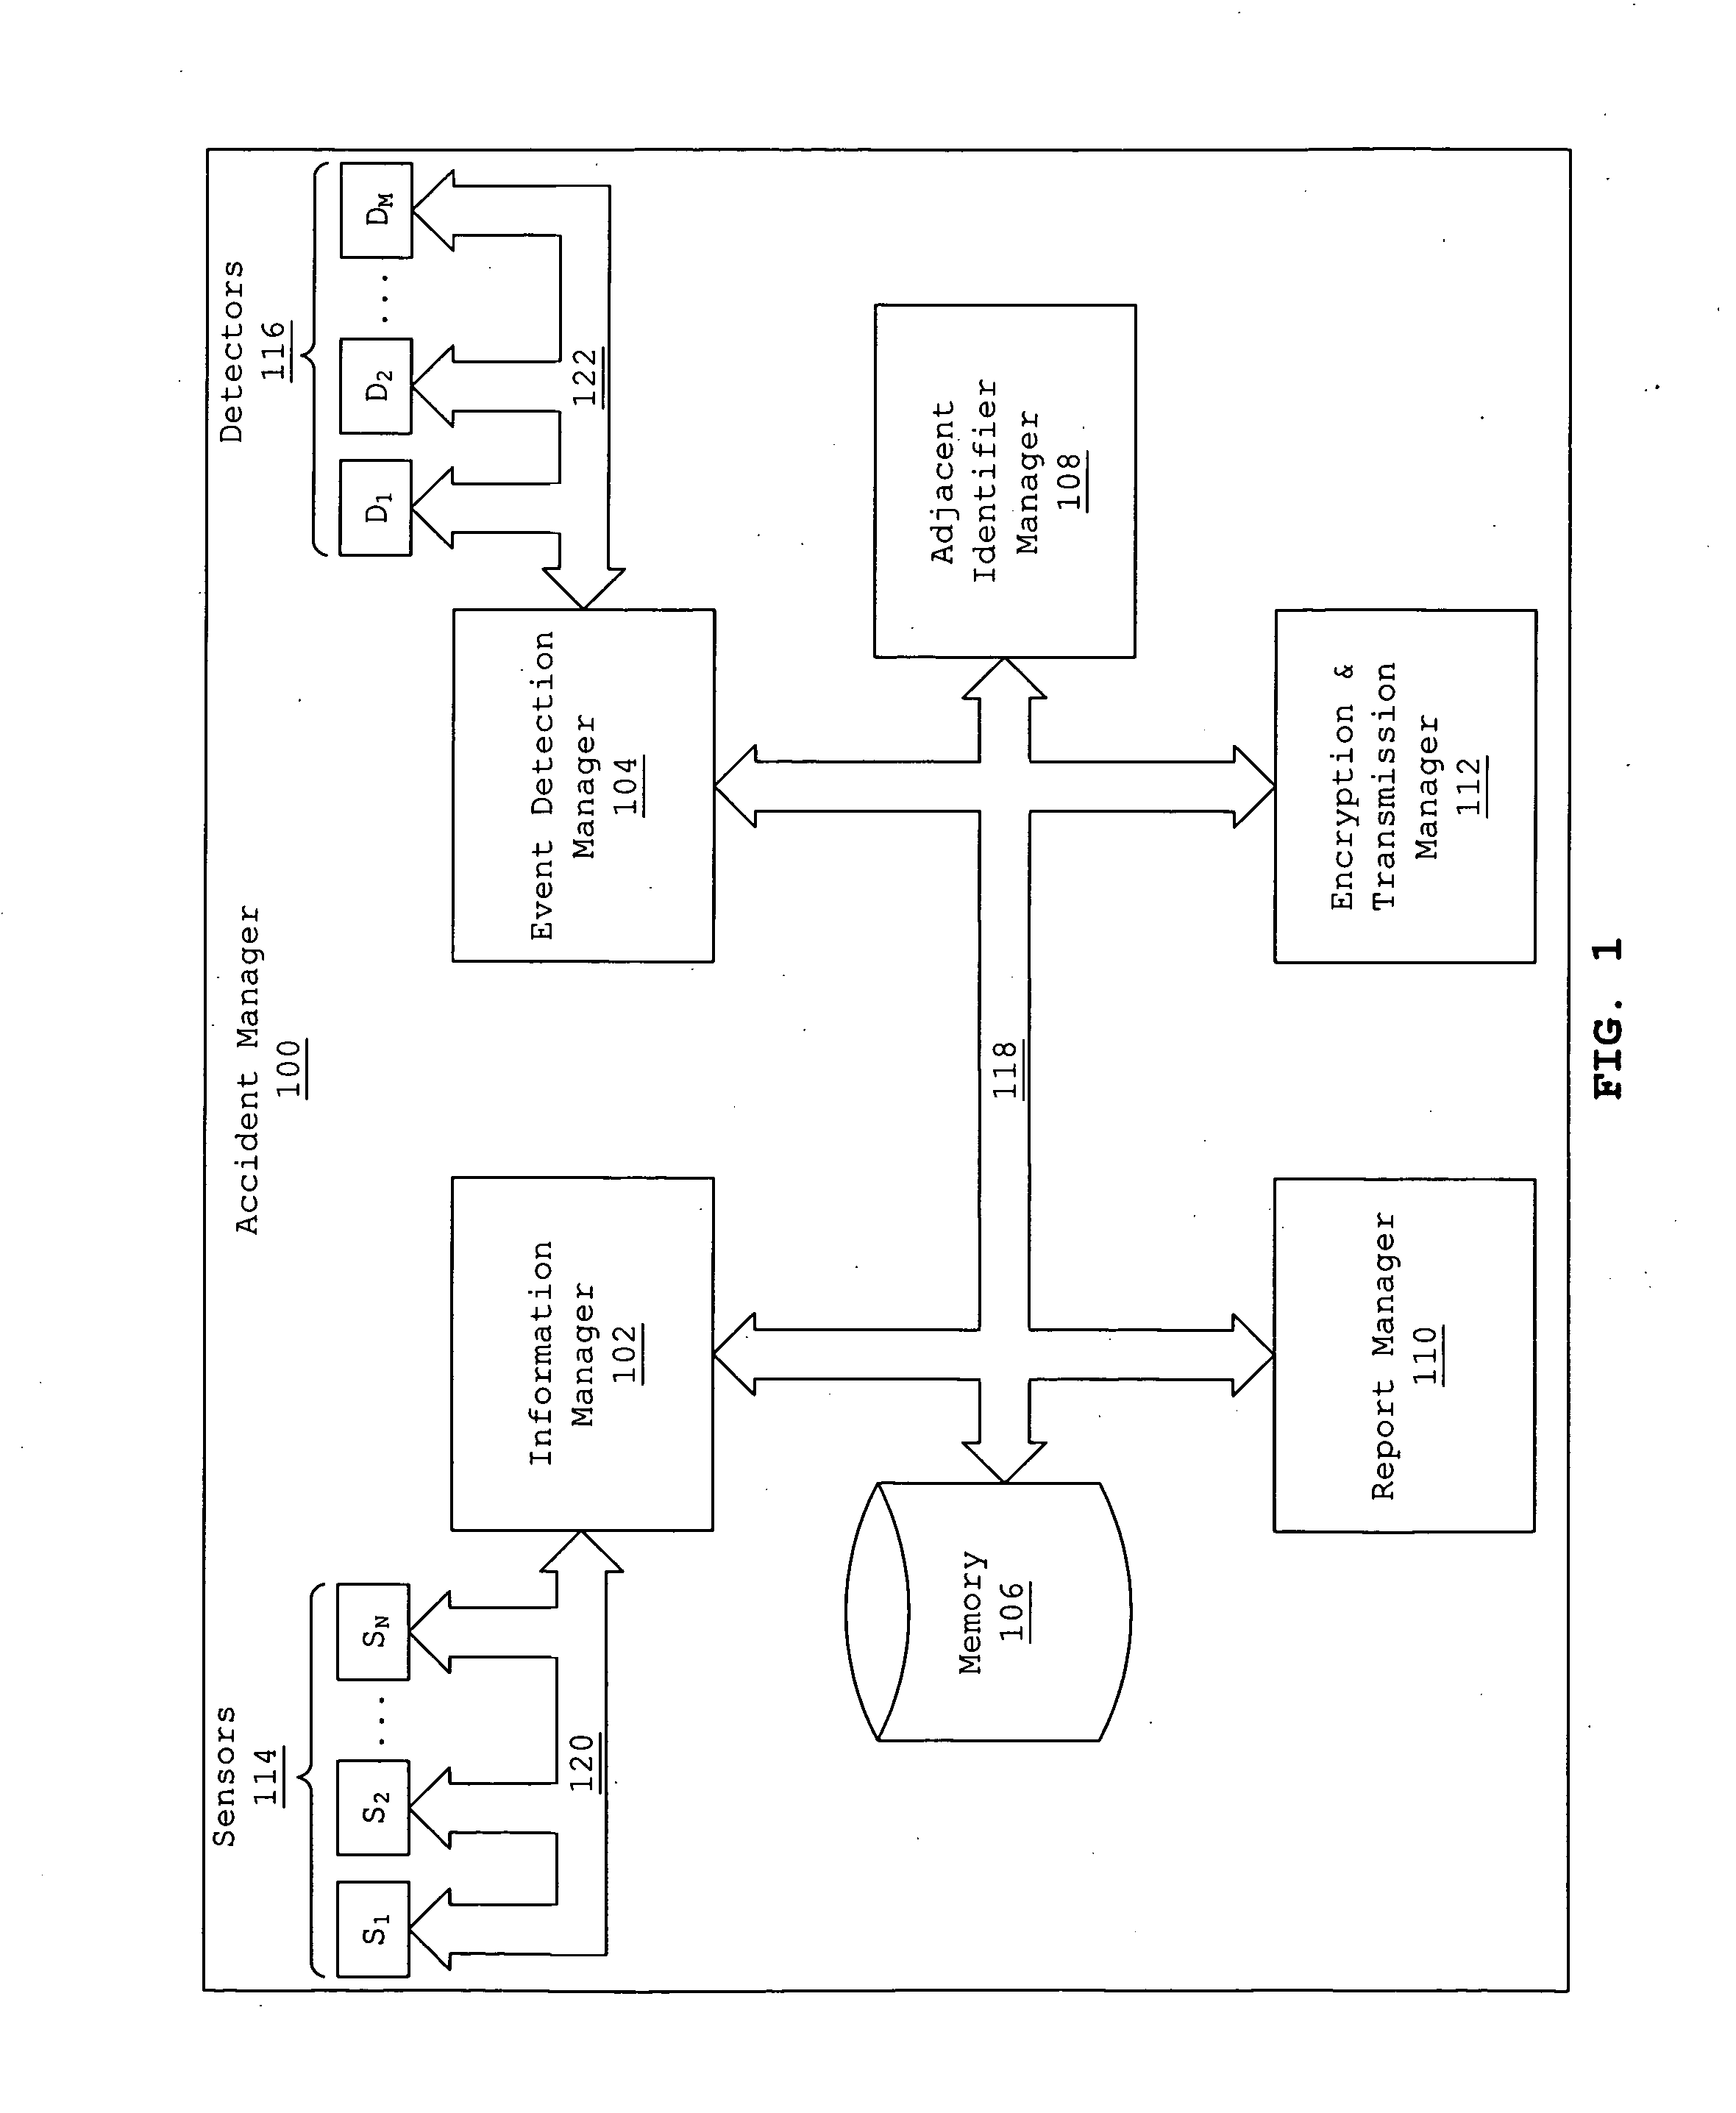 System and method for gathering and submitting data to a third party in response to a vehicle being involved in an accident